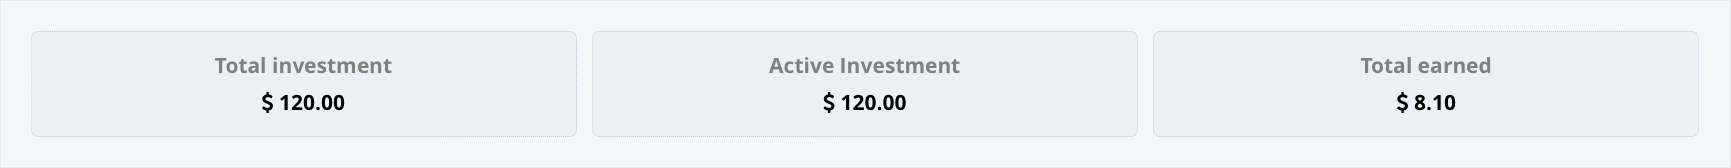 total_investment_day_5.png